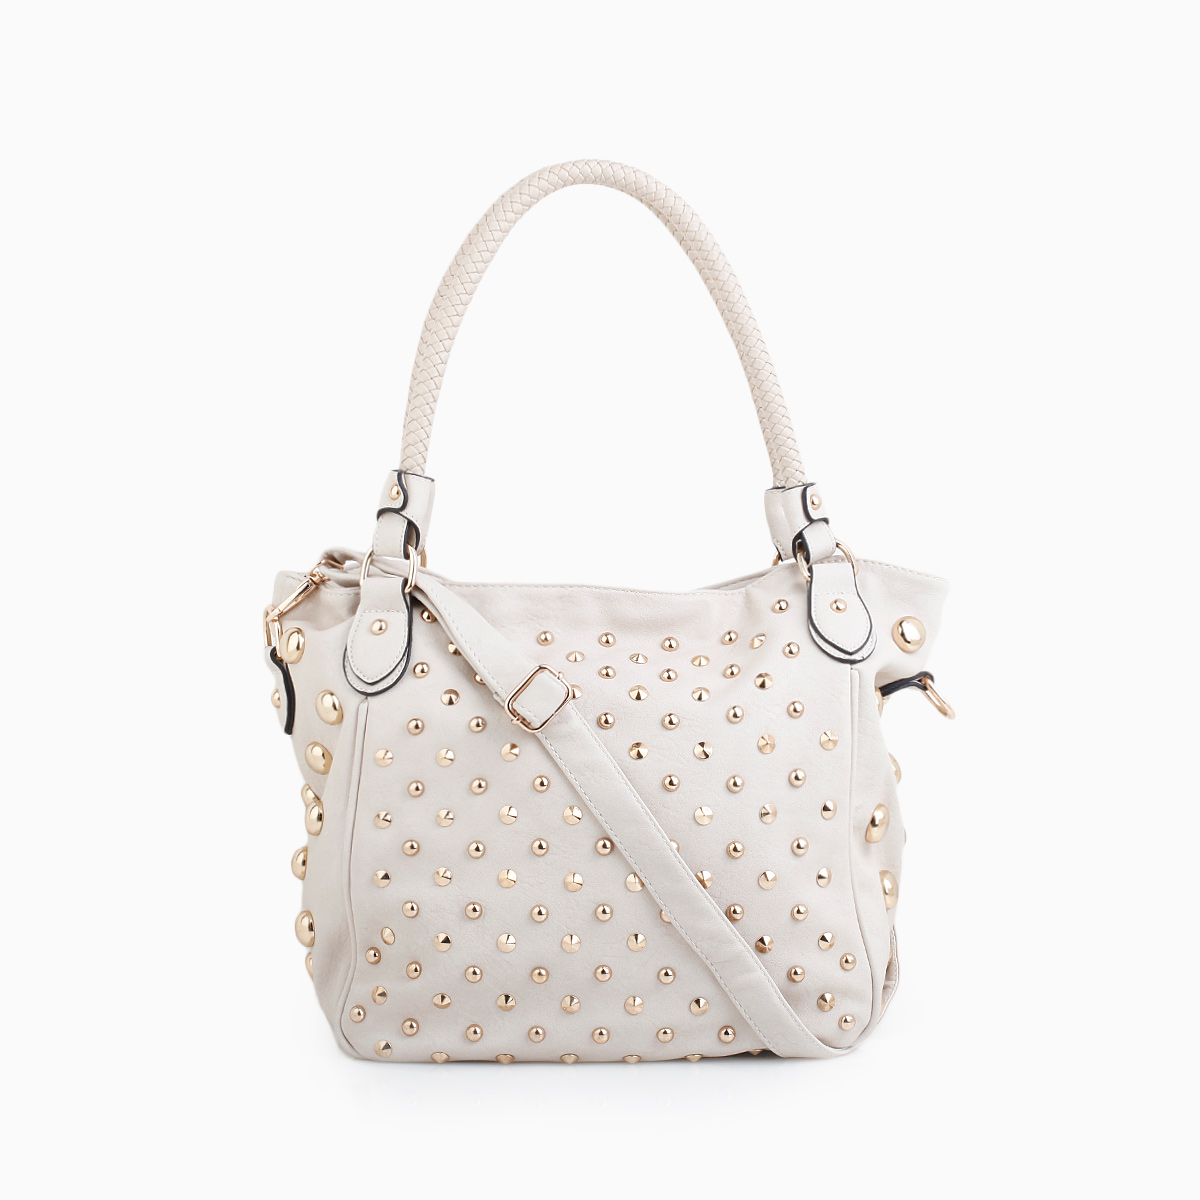 Large and Small Studded Purse in Beige | DAILYLOOK